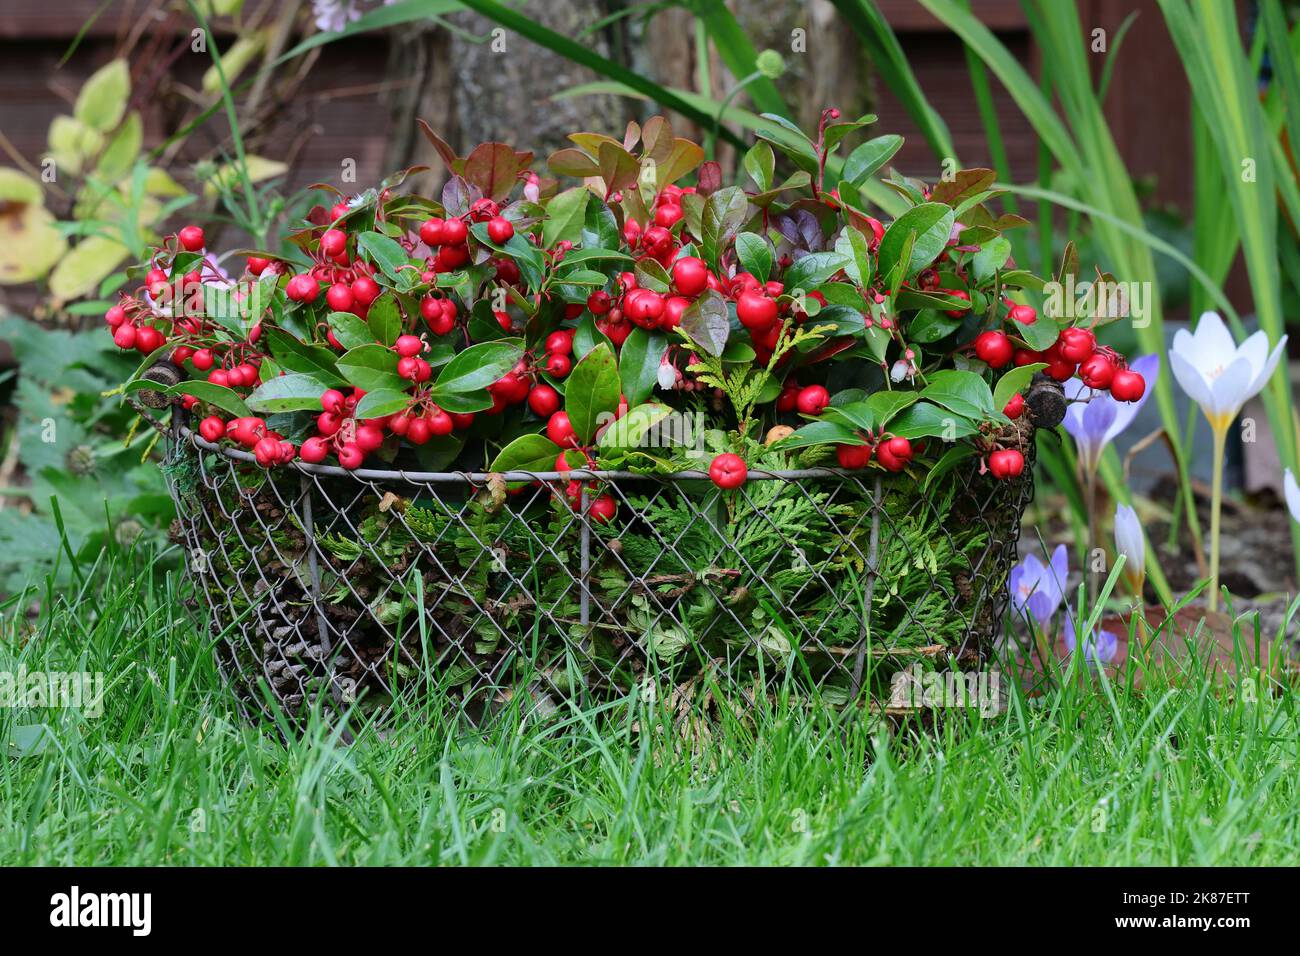 two pretty gaultheria procumbens plants adorn the autumn garden in a wire basket, side view with natural background Stock Photo